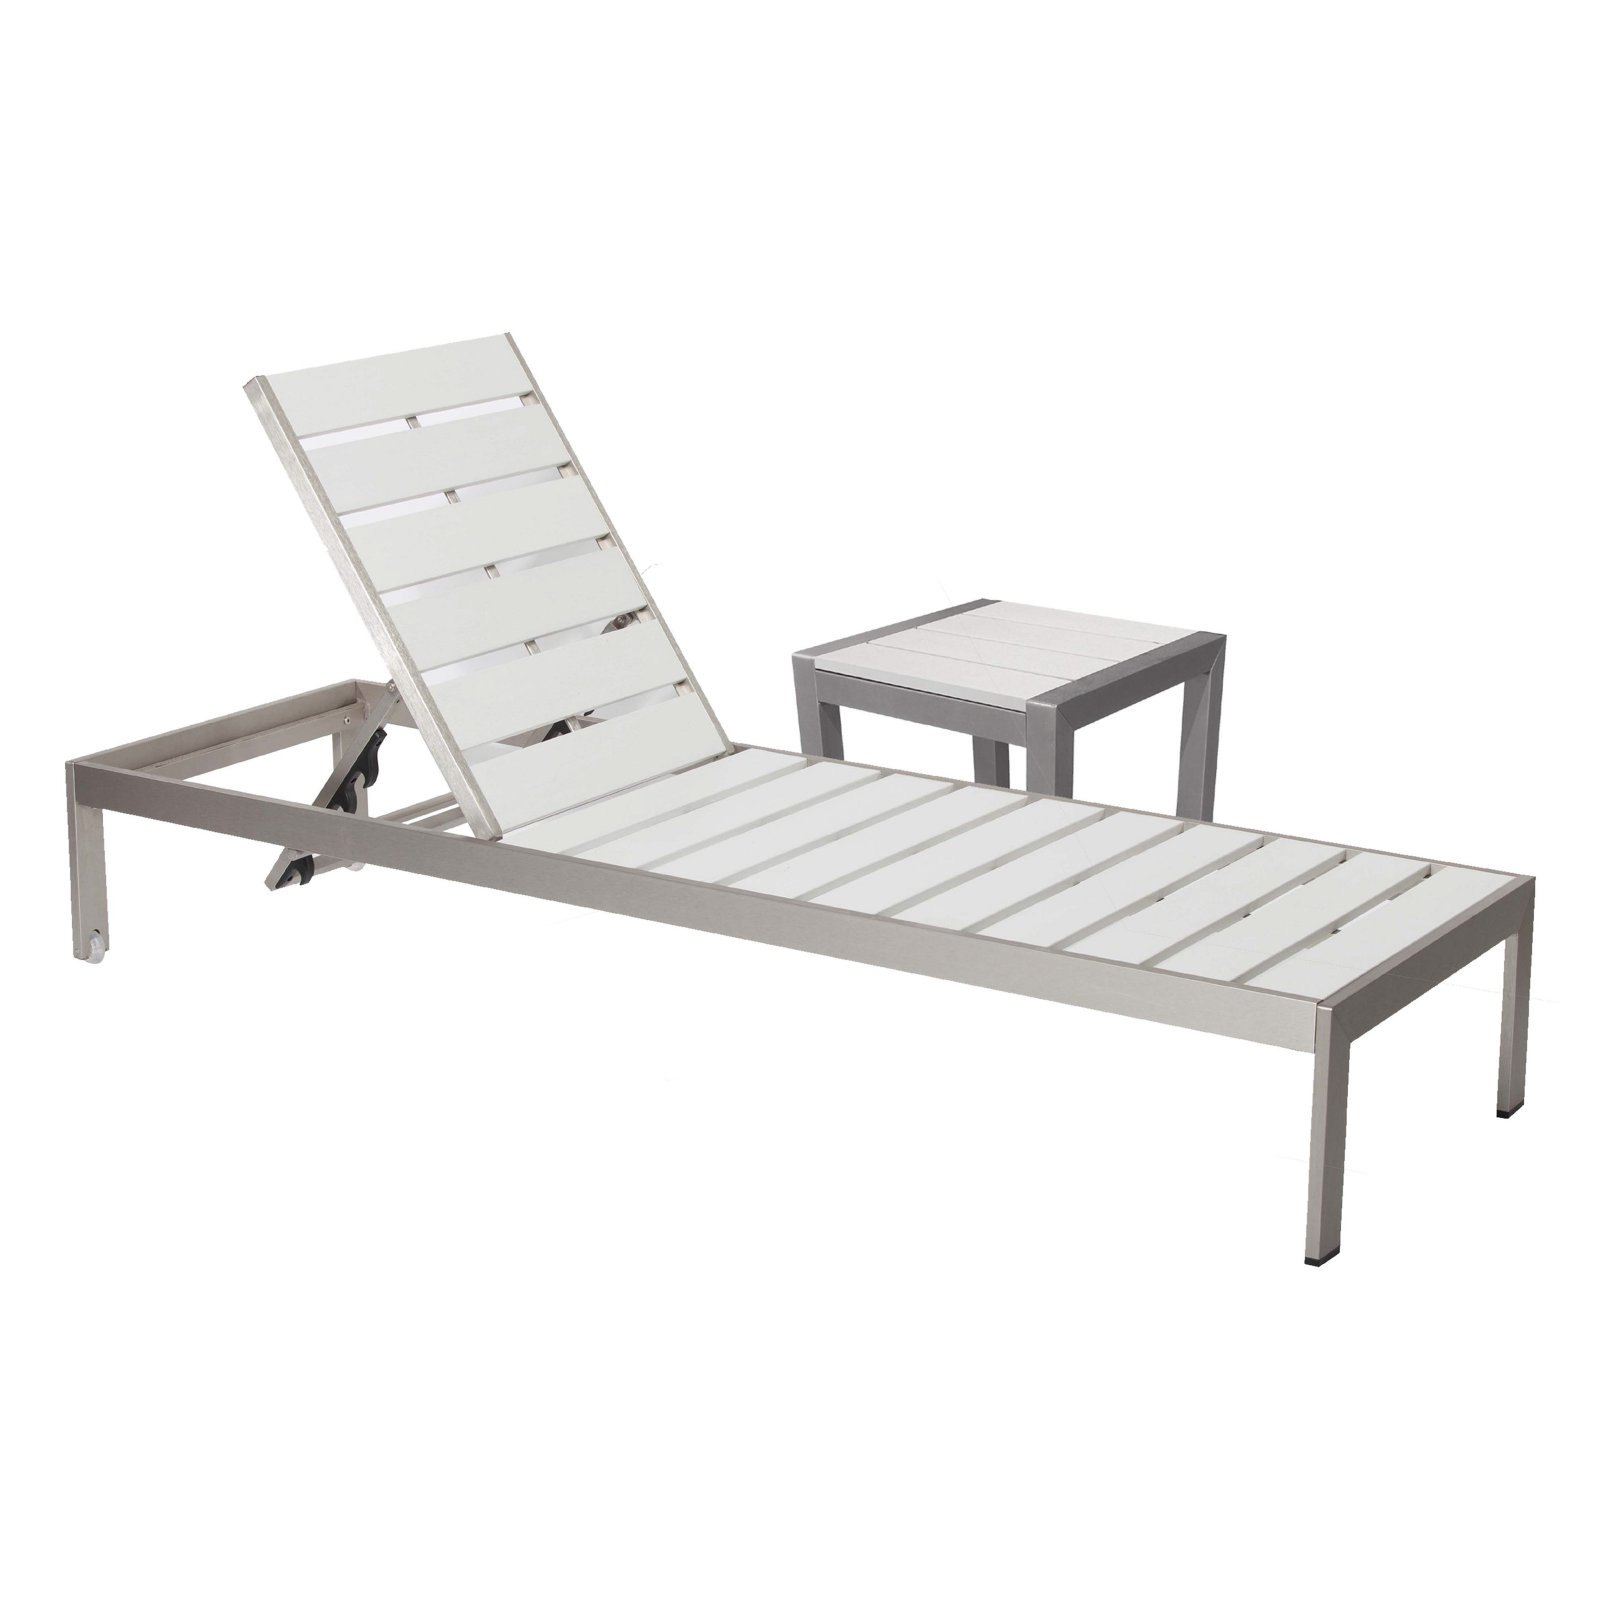 Pangea Home Joseph Lounger and Side Table Sets - image 1 of 2